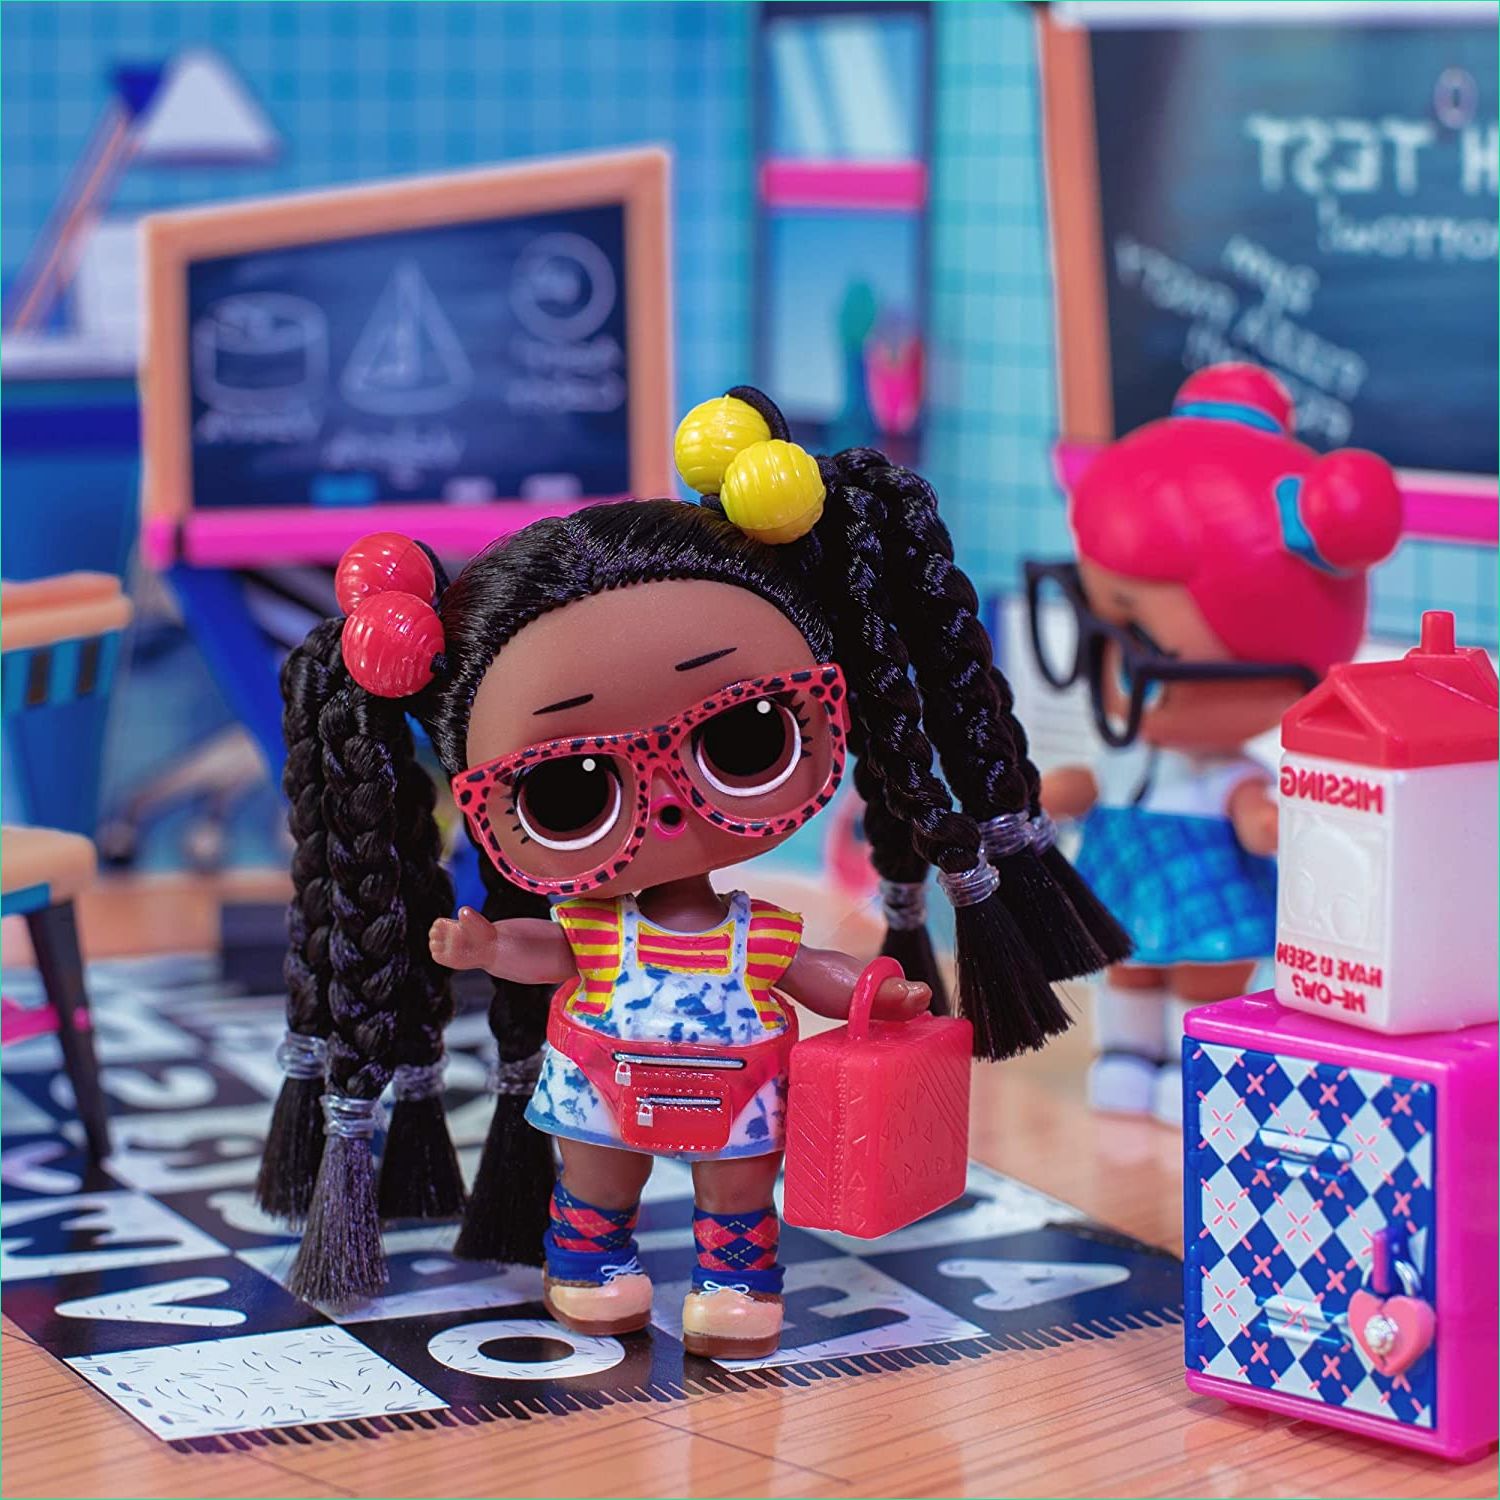 Lol Surprise Dolls Cool Photos Lol Surprise Hairgoals Series 2 – New Lol Dolls with Beautiful Real